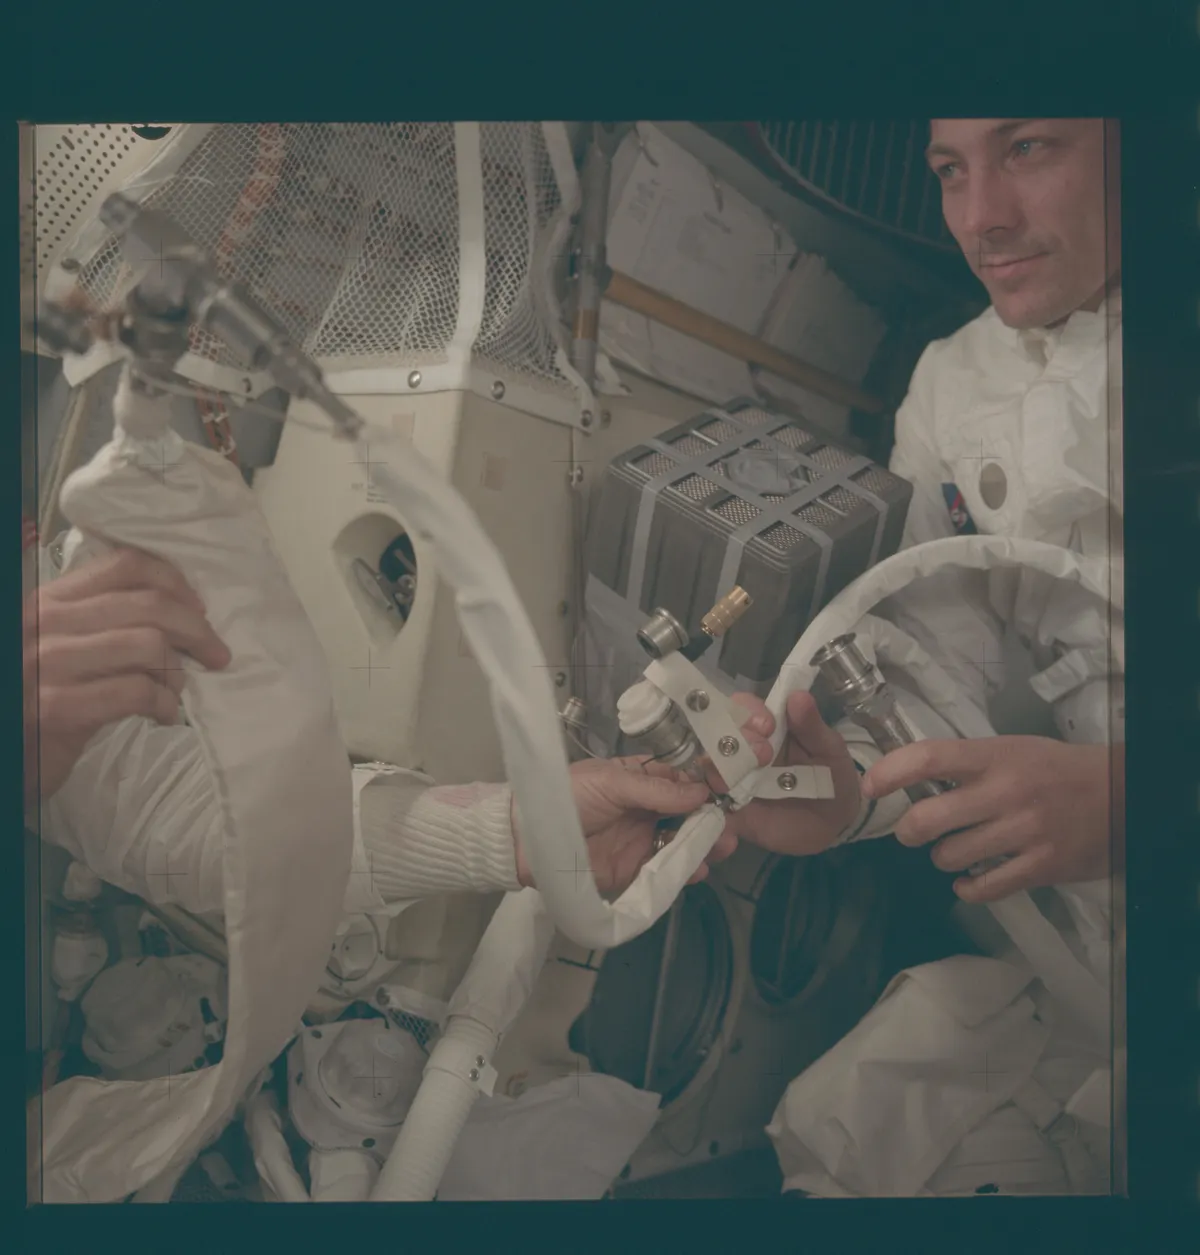 AS13-62-9004 Apollo 13 Hasselblad image from film magazine 62/JJ - Onboard